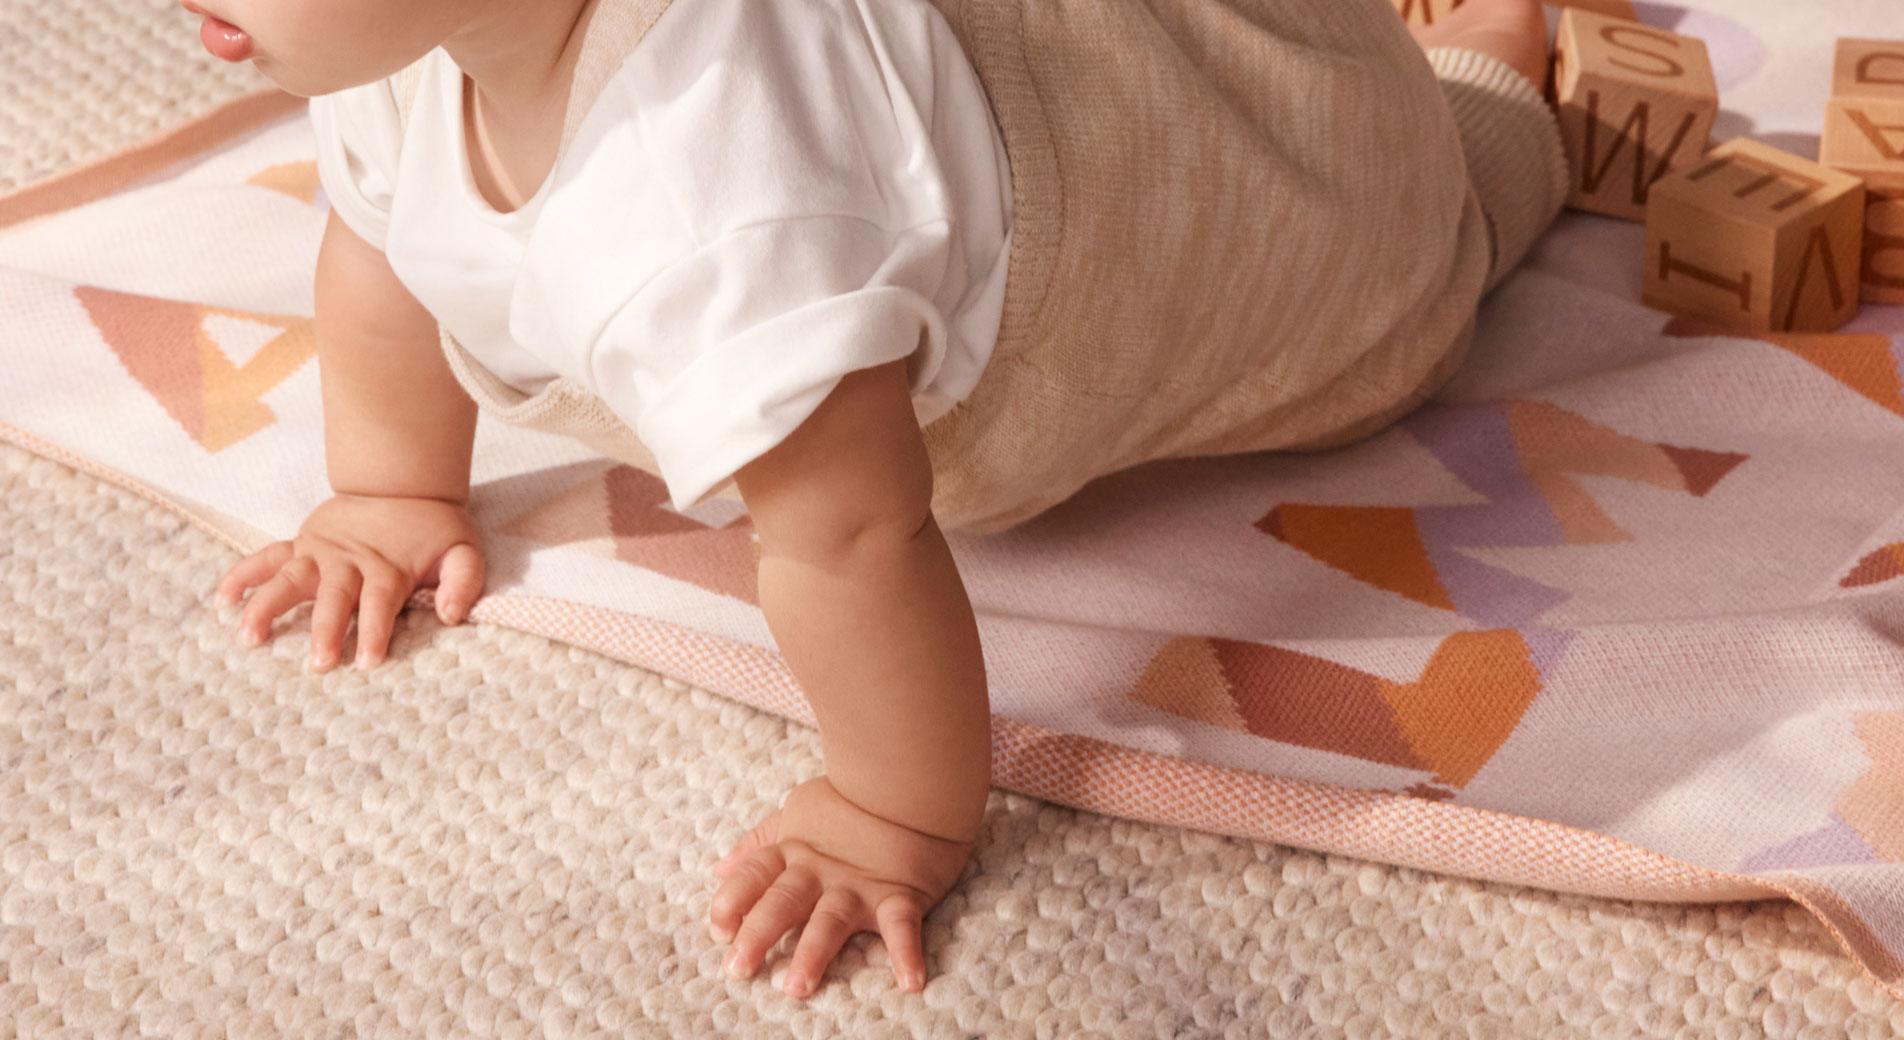 cropped landscape shot of baby enjoying tummy time on jute rug, with sheridan aleph blanket beneath him. he has his mouth open and looks alert, wearing a white tee with rolled up sleeves and beige joggers.